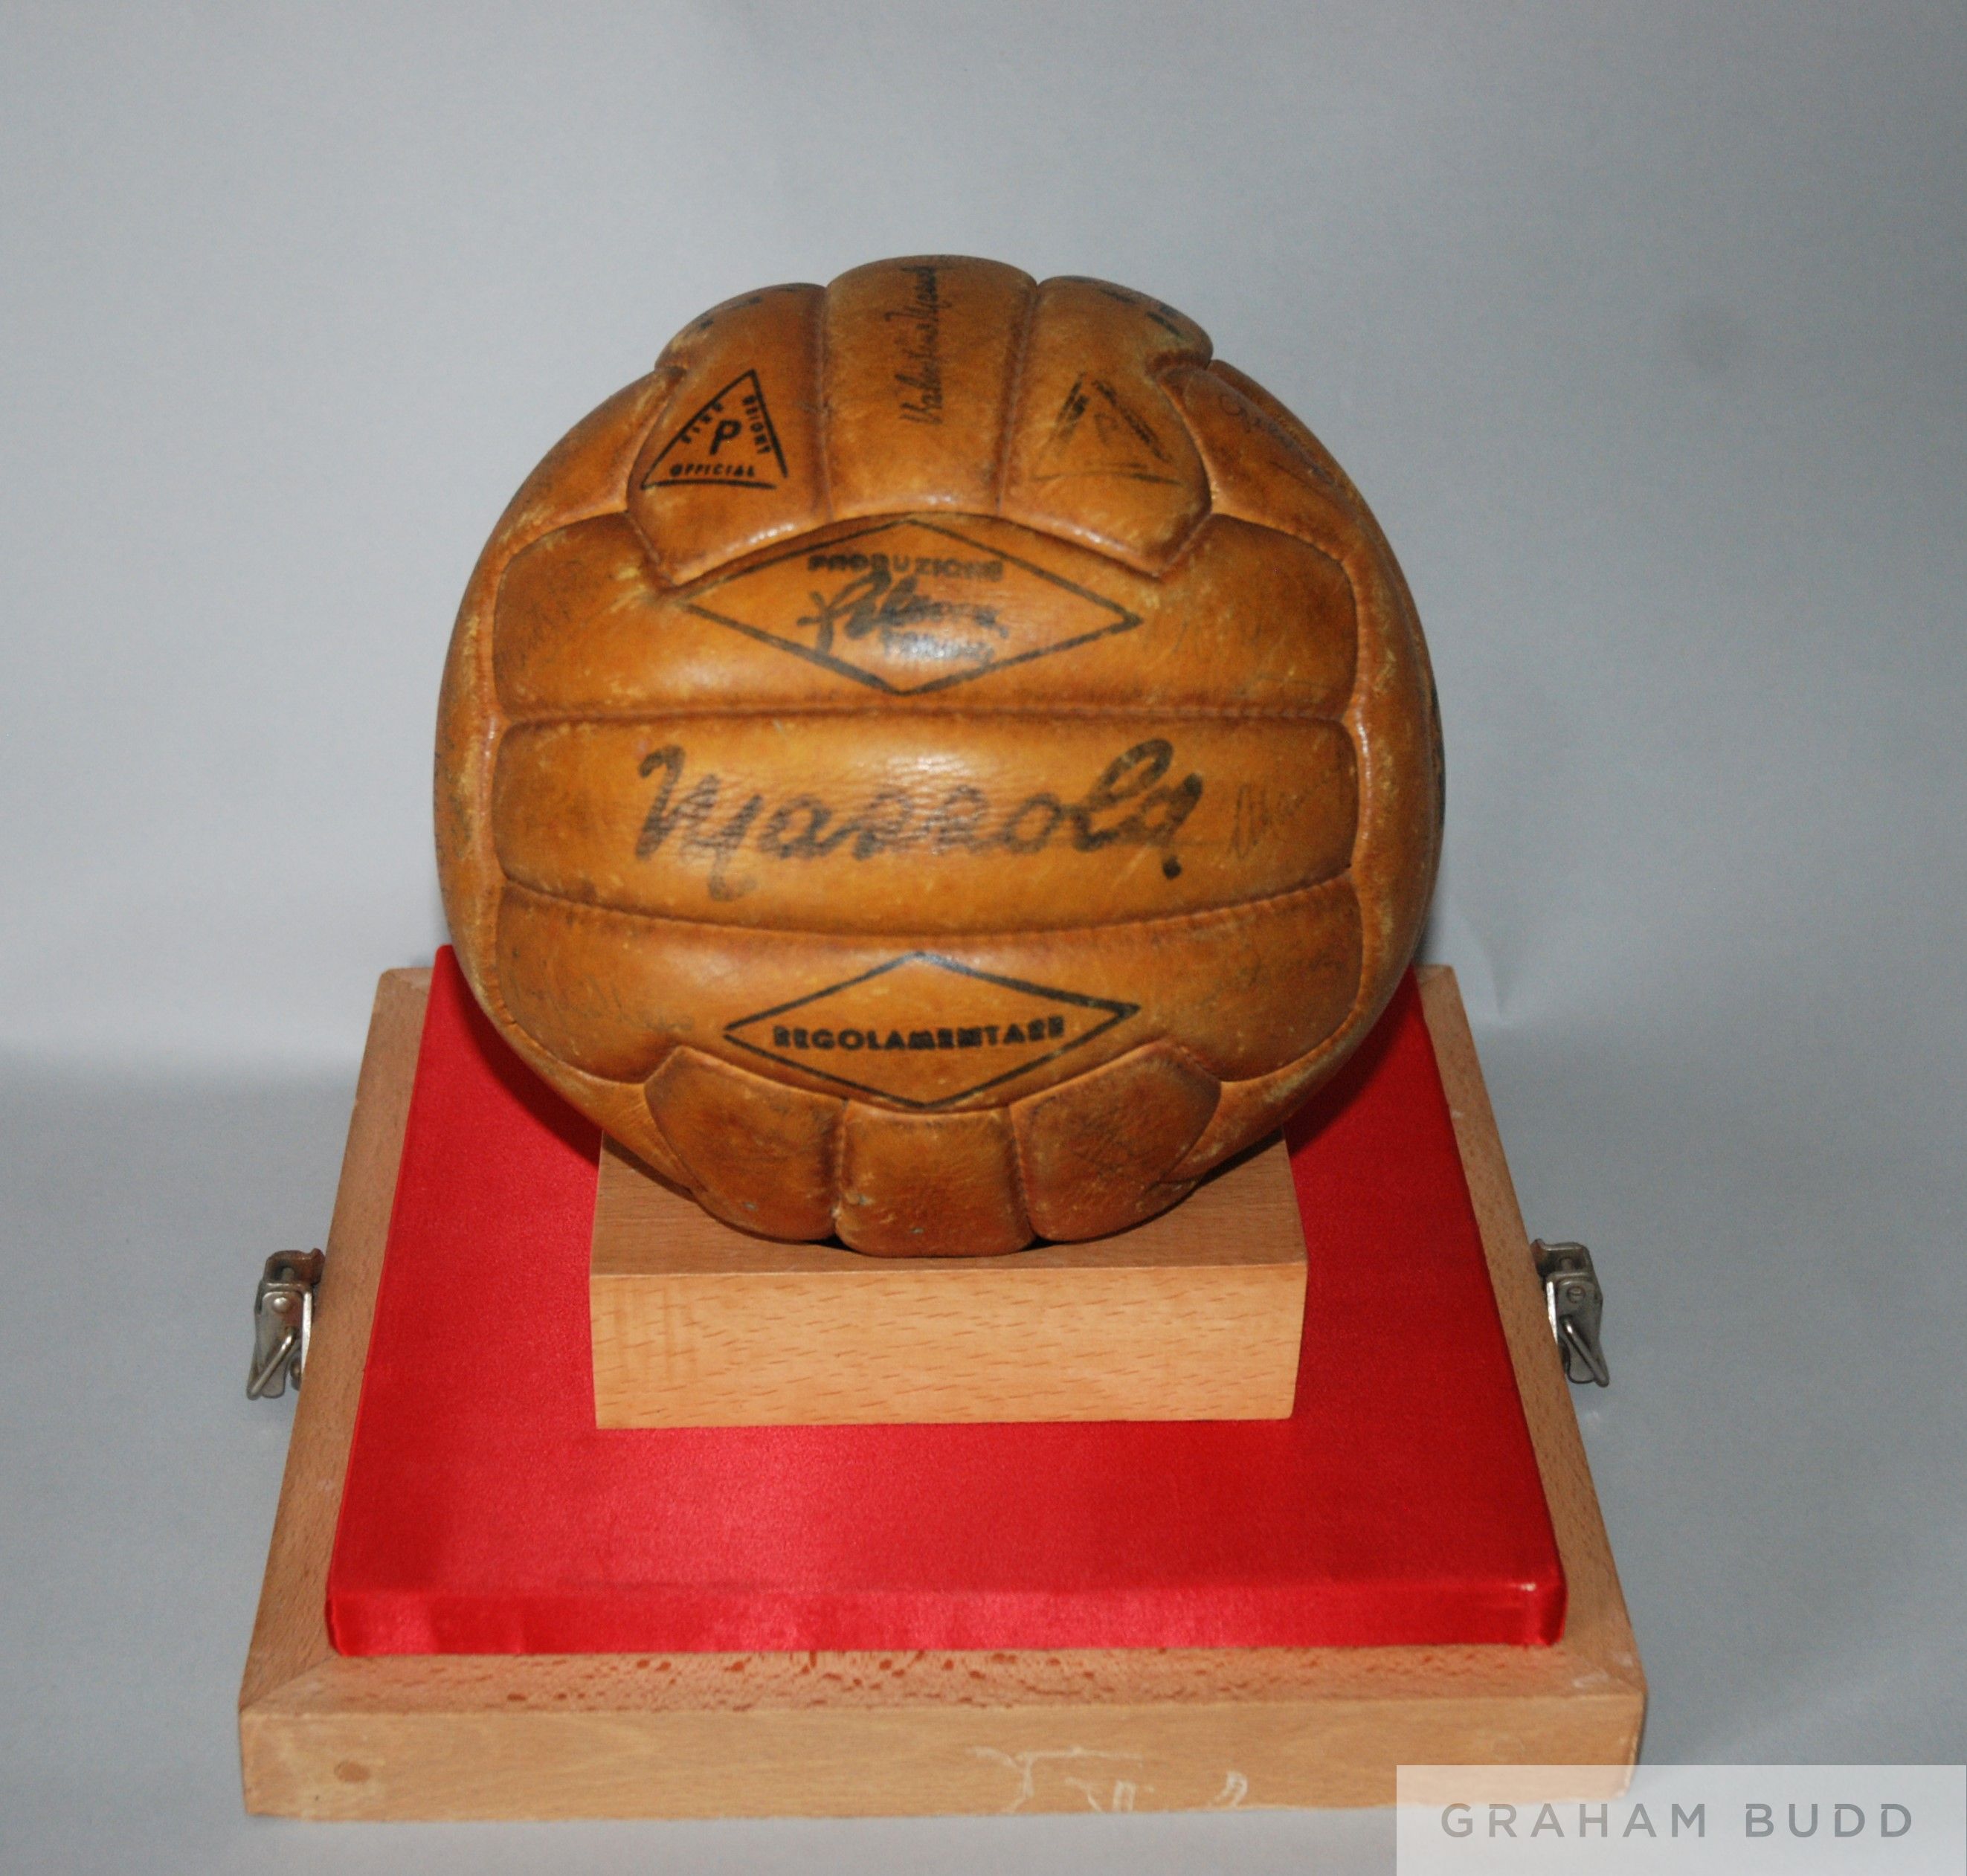 ITALY v. ENGLAND 16/5/48: a Mazzola brown leather football used in the 1948 International match